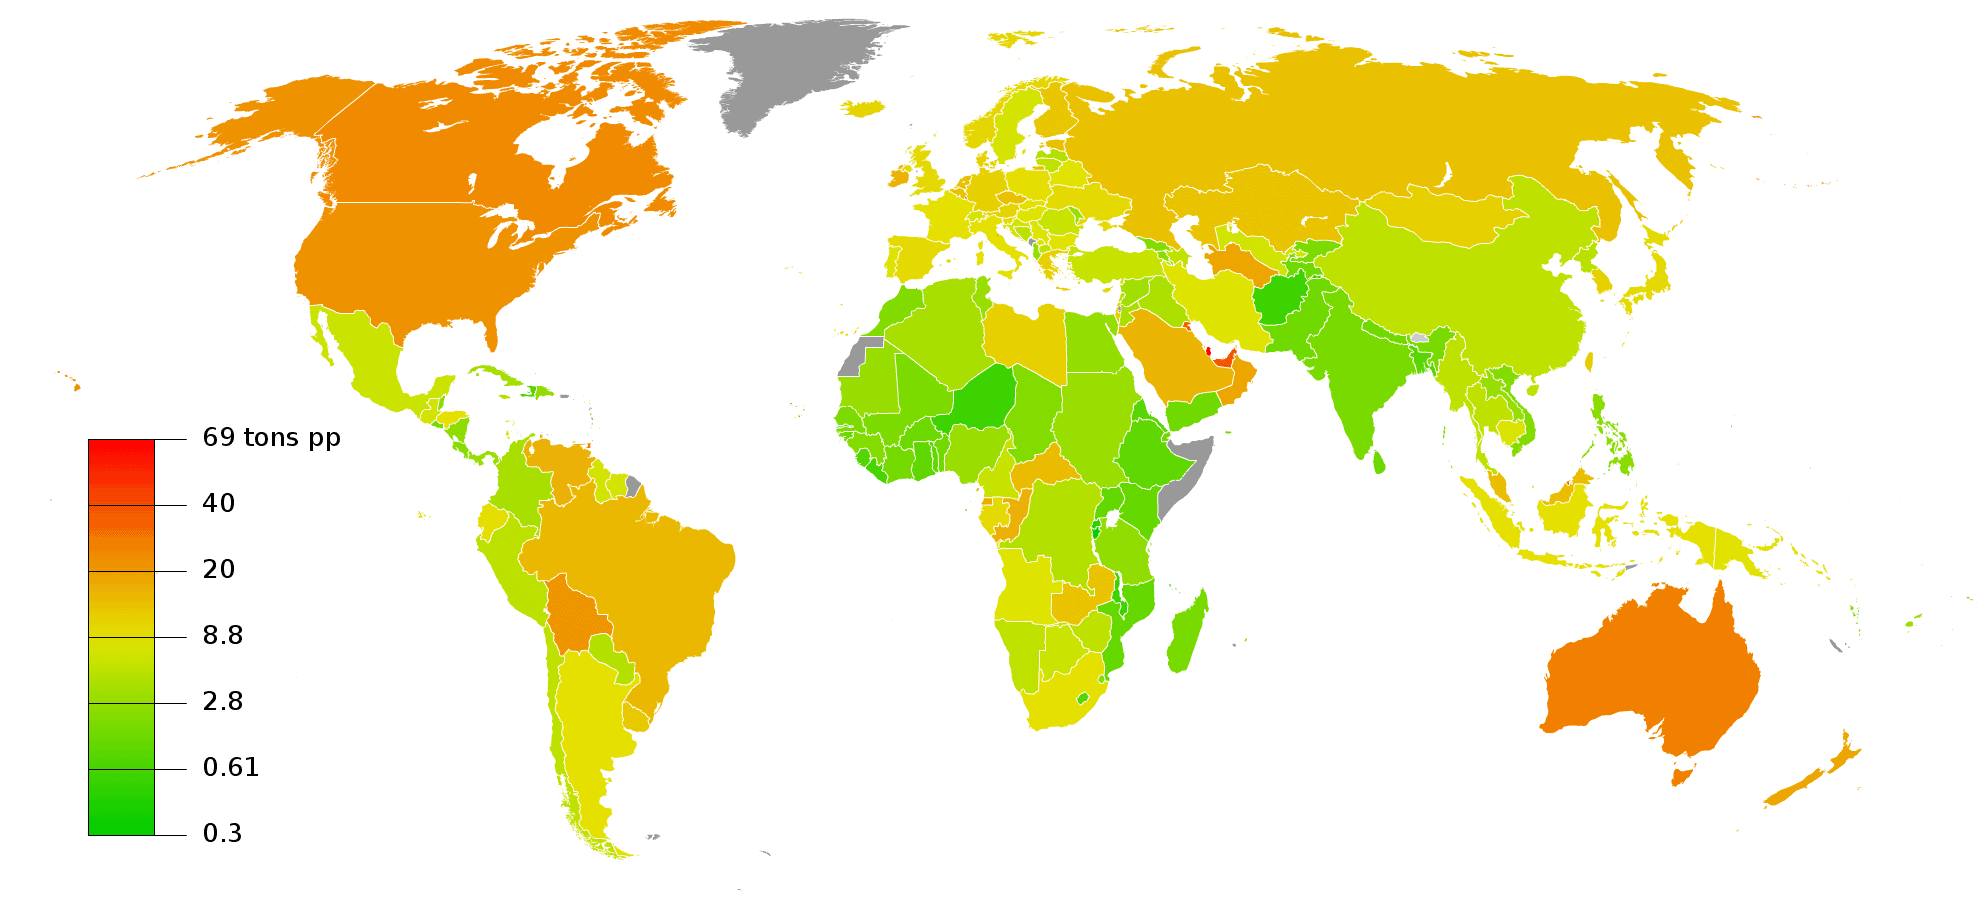 Per capita GHG emissions in 2005, including land-use change.